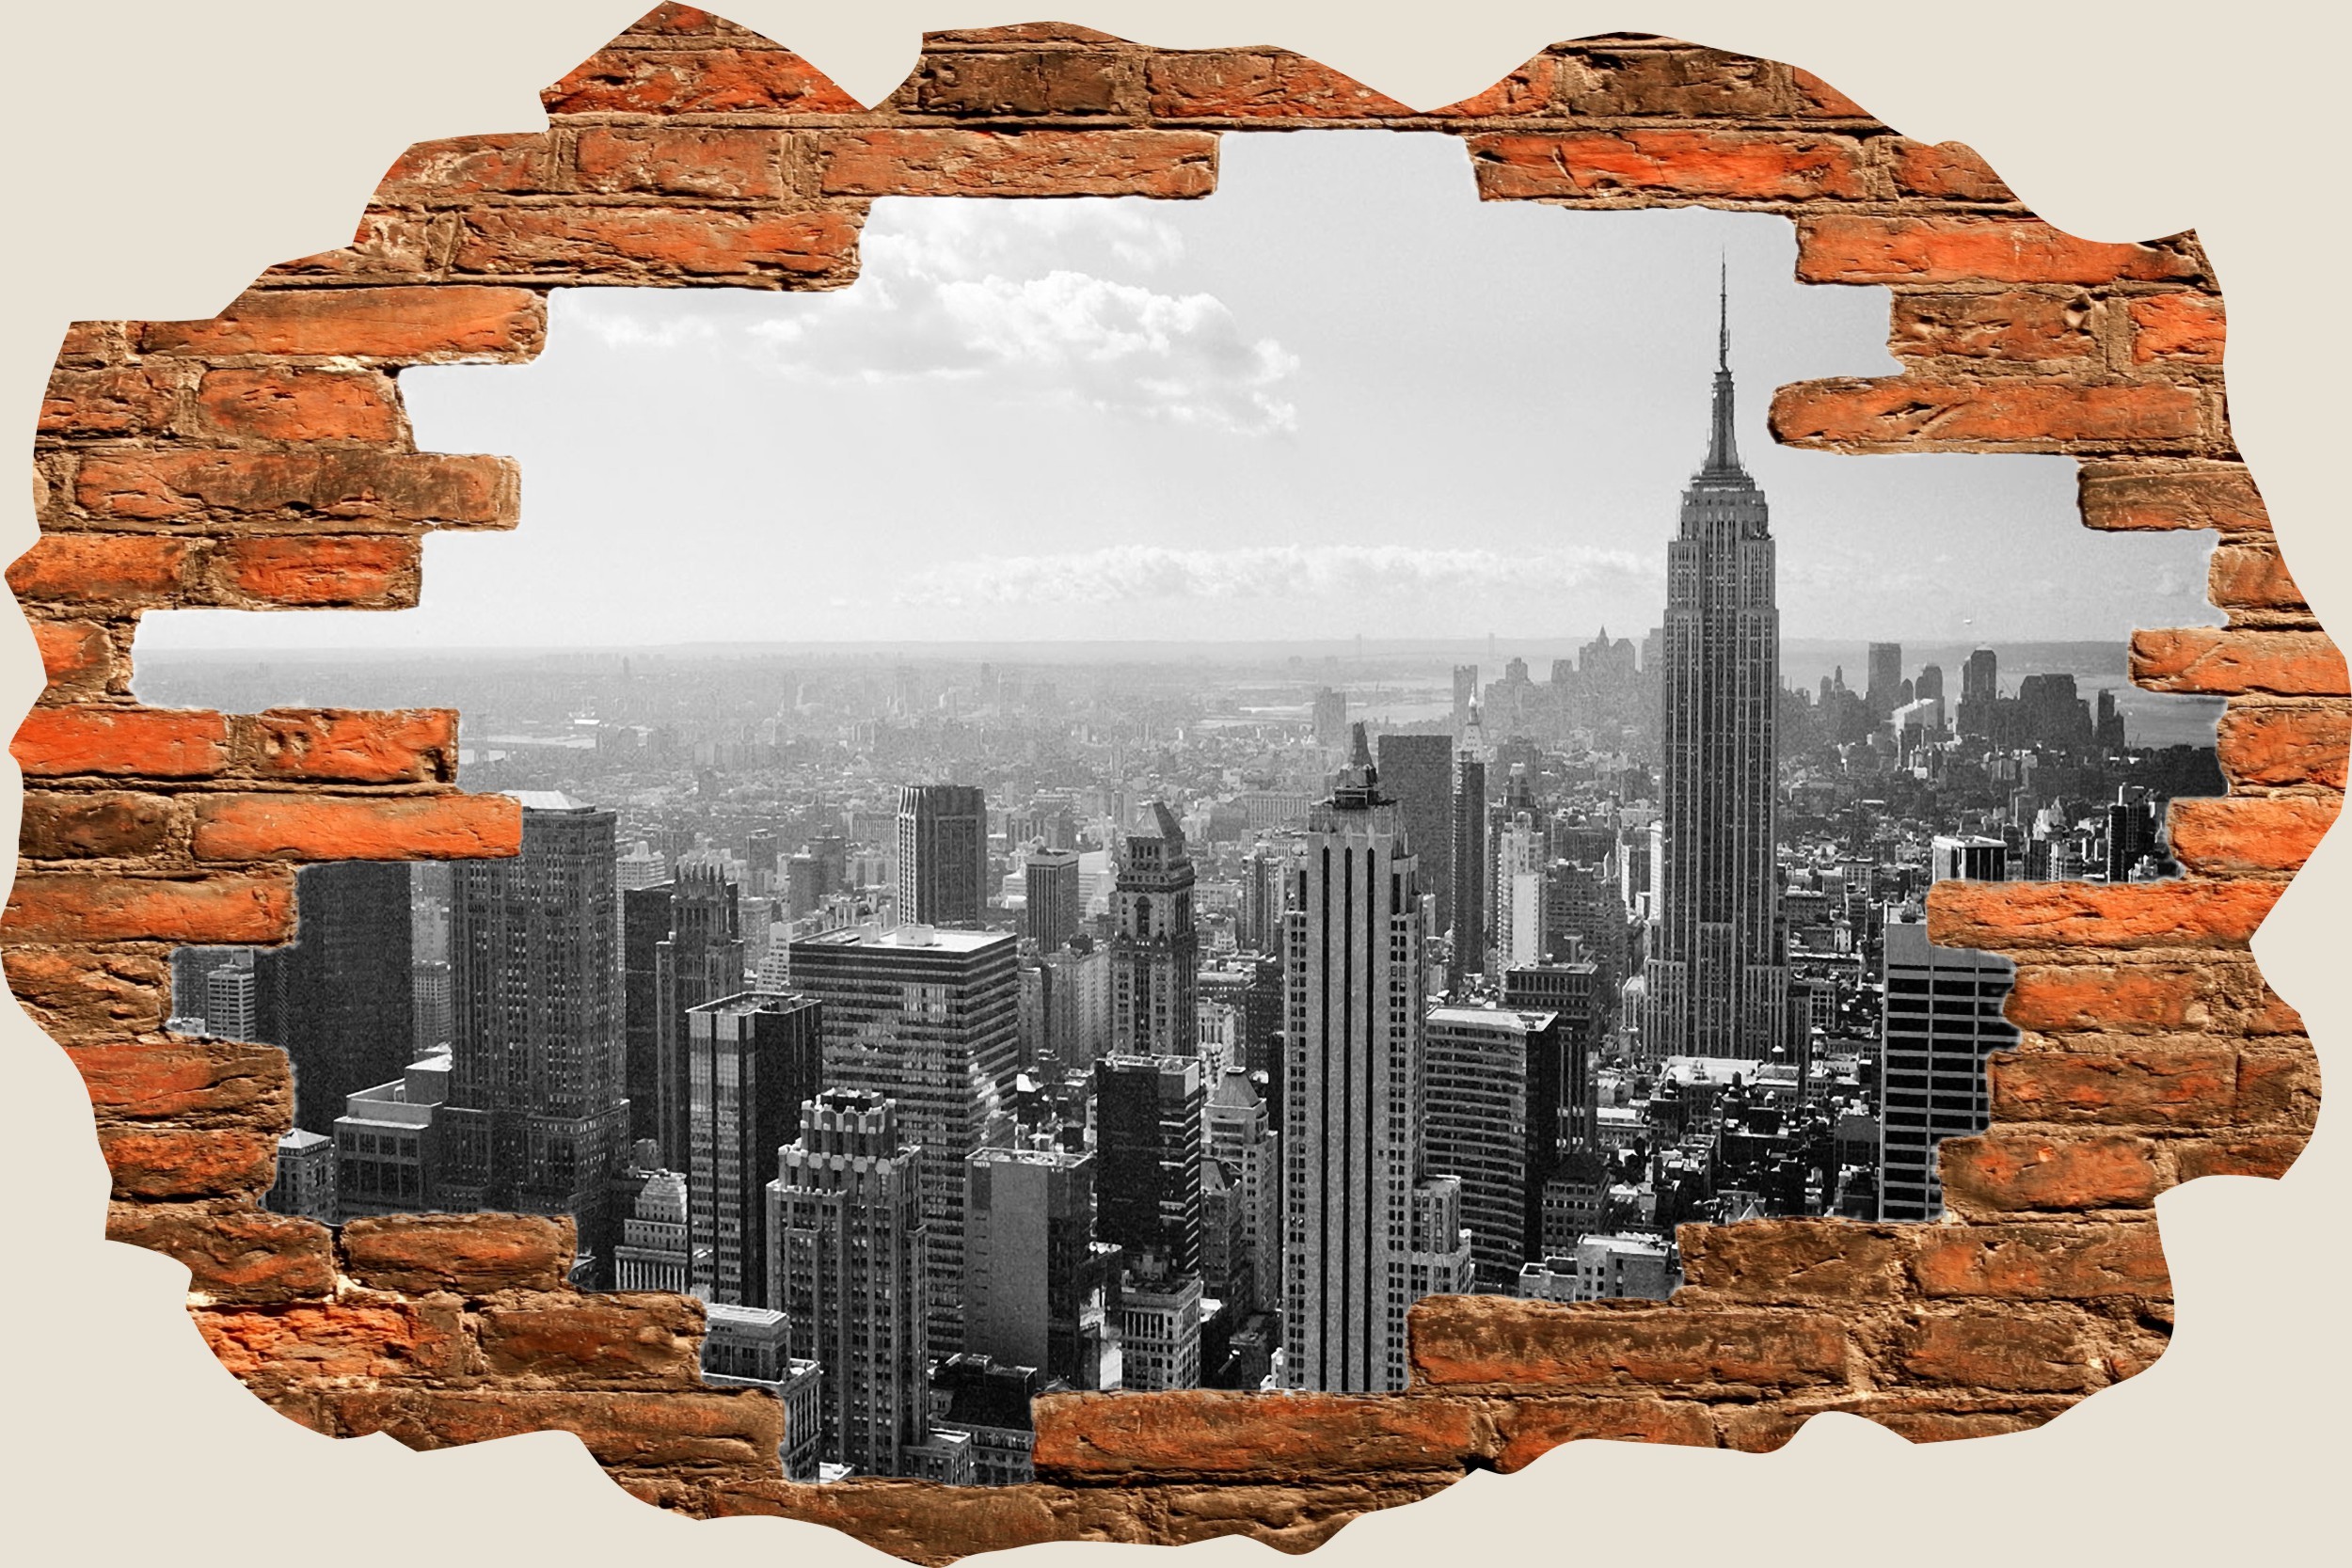 2500x1667 Details about 3D Hole in Wall New York City View Wall Sticker Mural Film  Decal Wallpaper S68